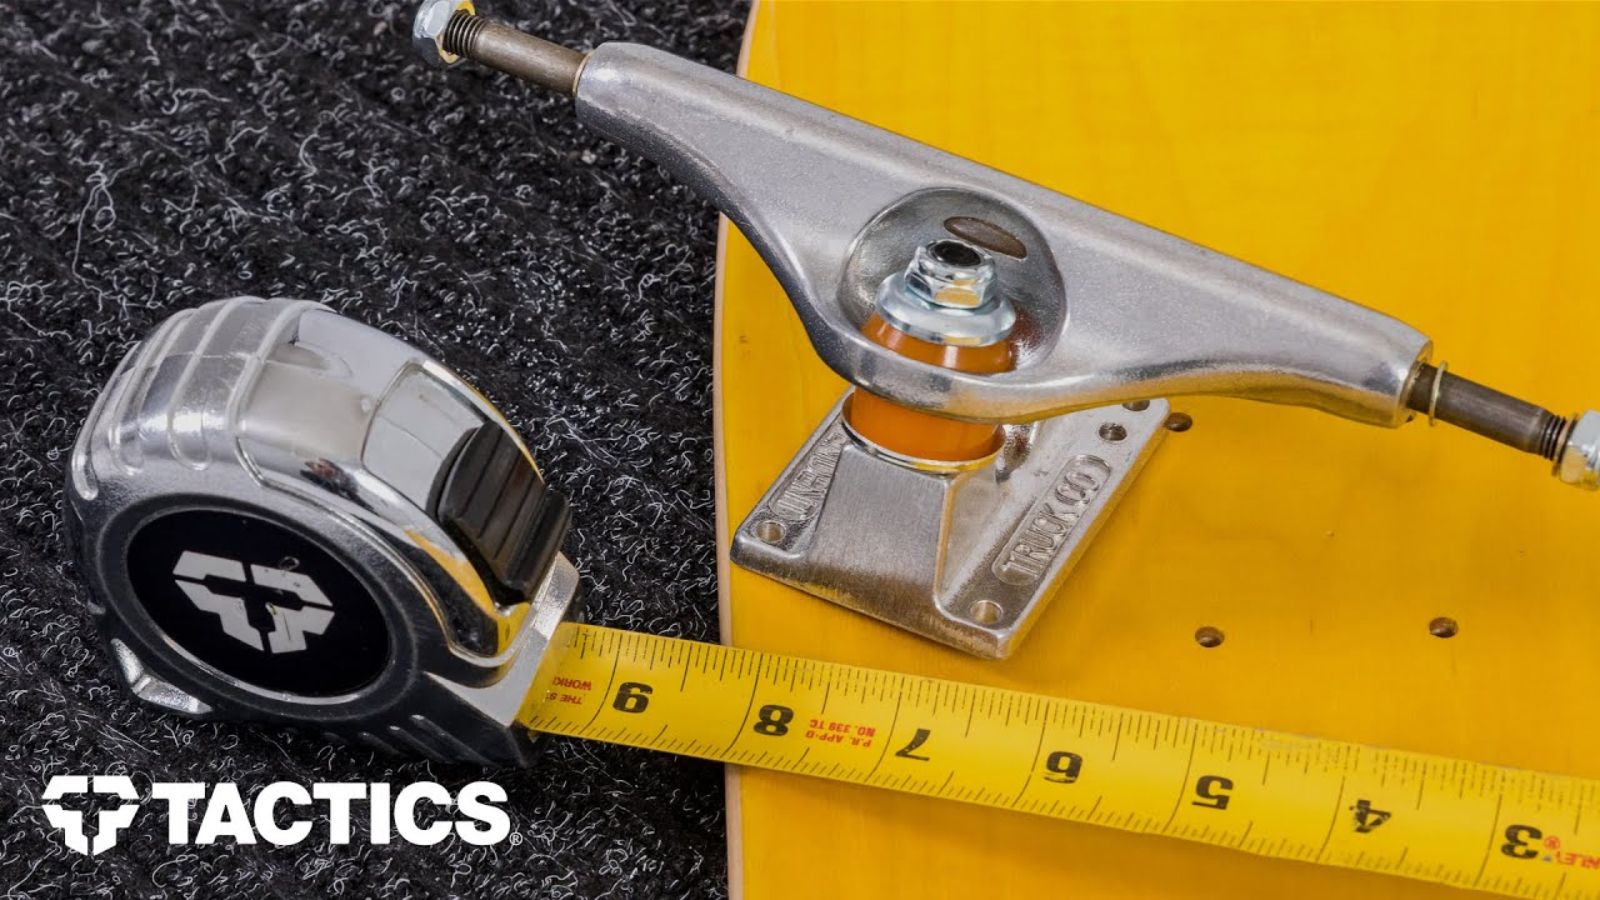 A measuring tape next to a skateboard.